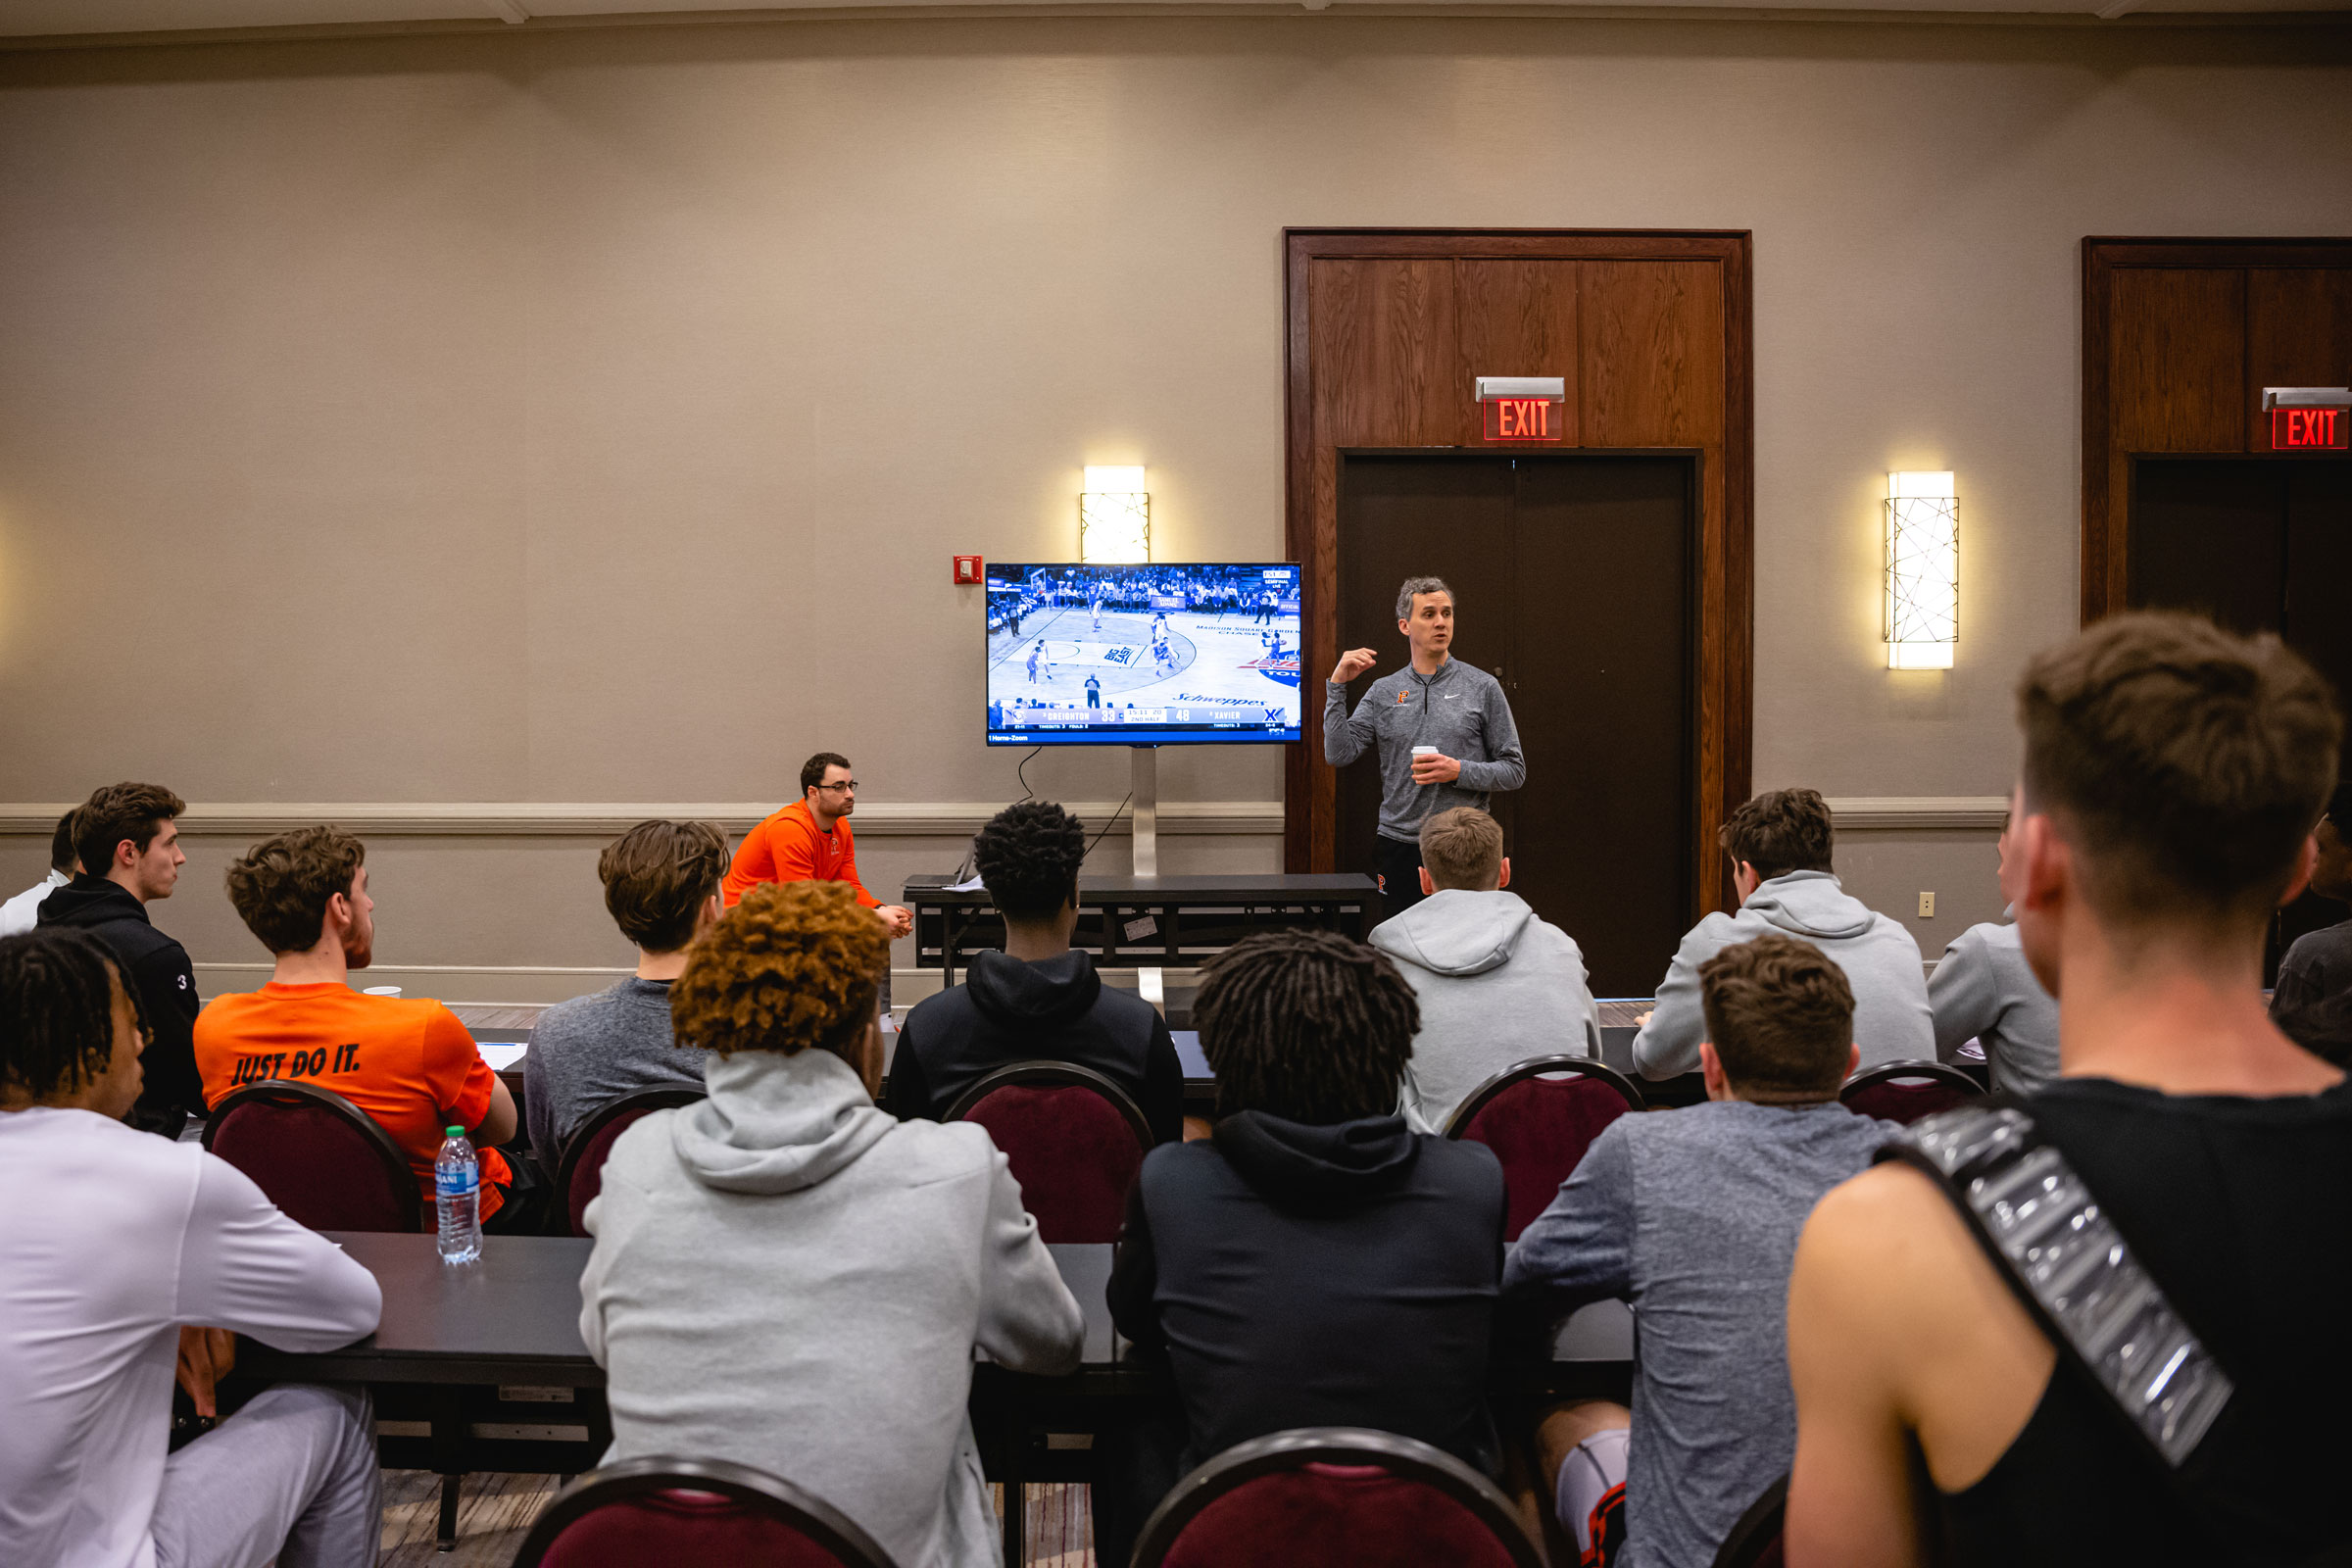 Mitch Henderson reviews footage of a recent Creighton game during a team meeting at the hotel. (Jon Cherry for TIME)